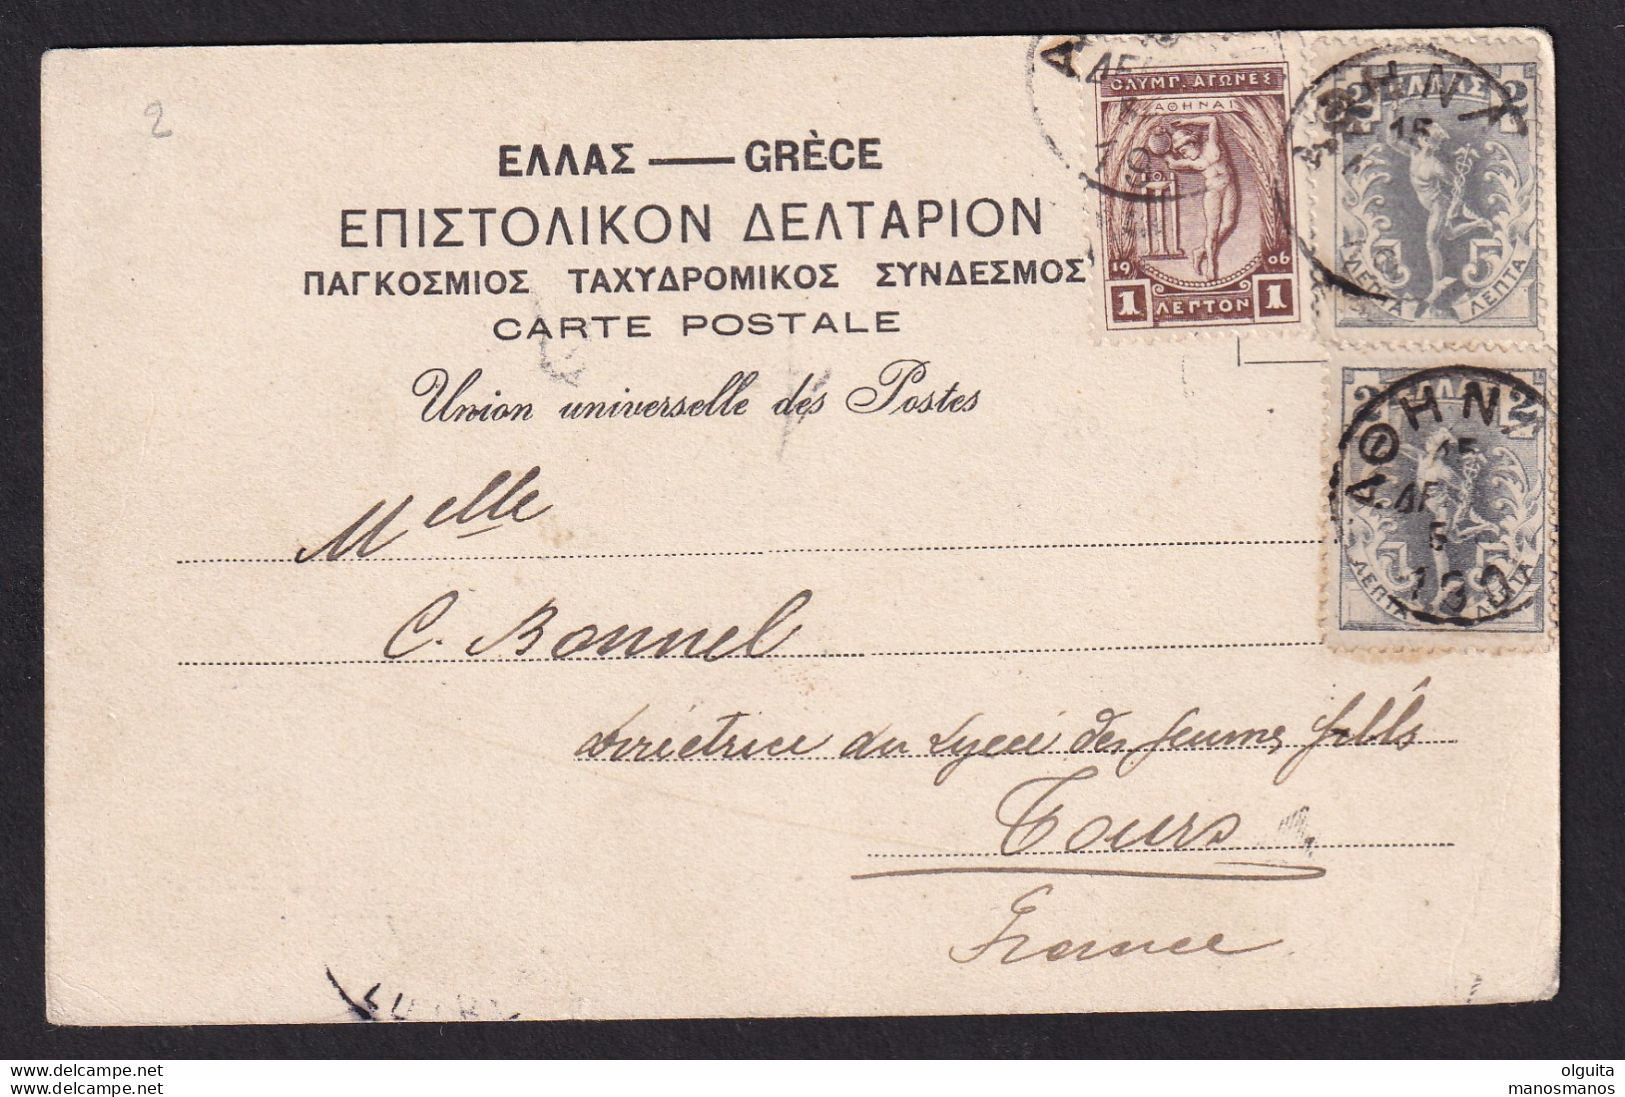 DDCC 396 - GREECE Olympic Games 1906 - Viewcard With Mixed Franking Olympic Stamp With Iptamenos ATHINAI - Lettres & Documents